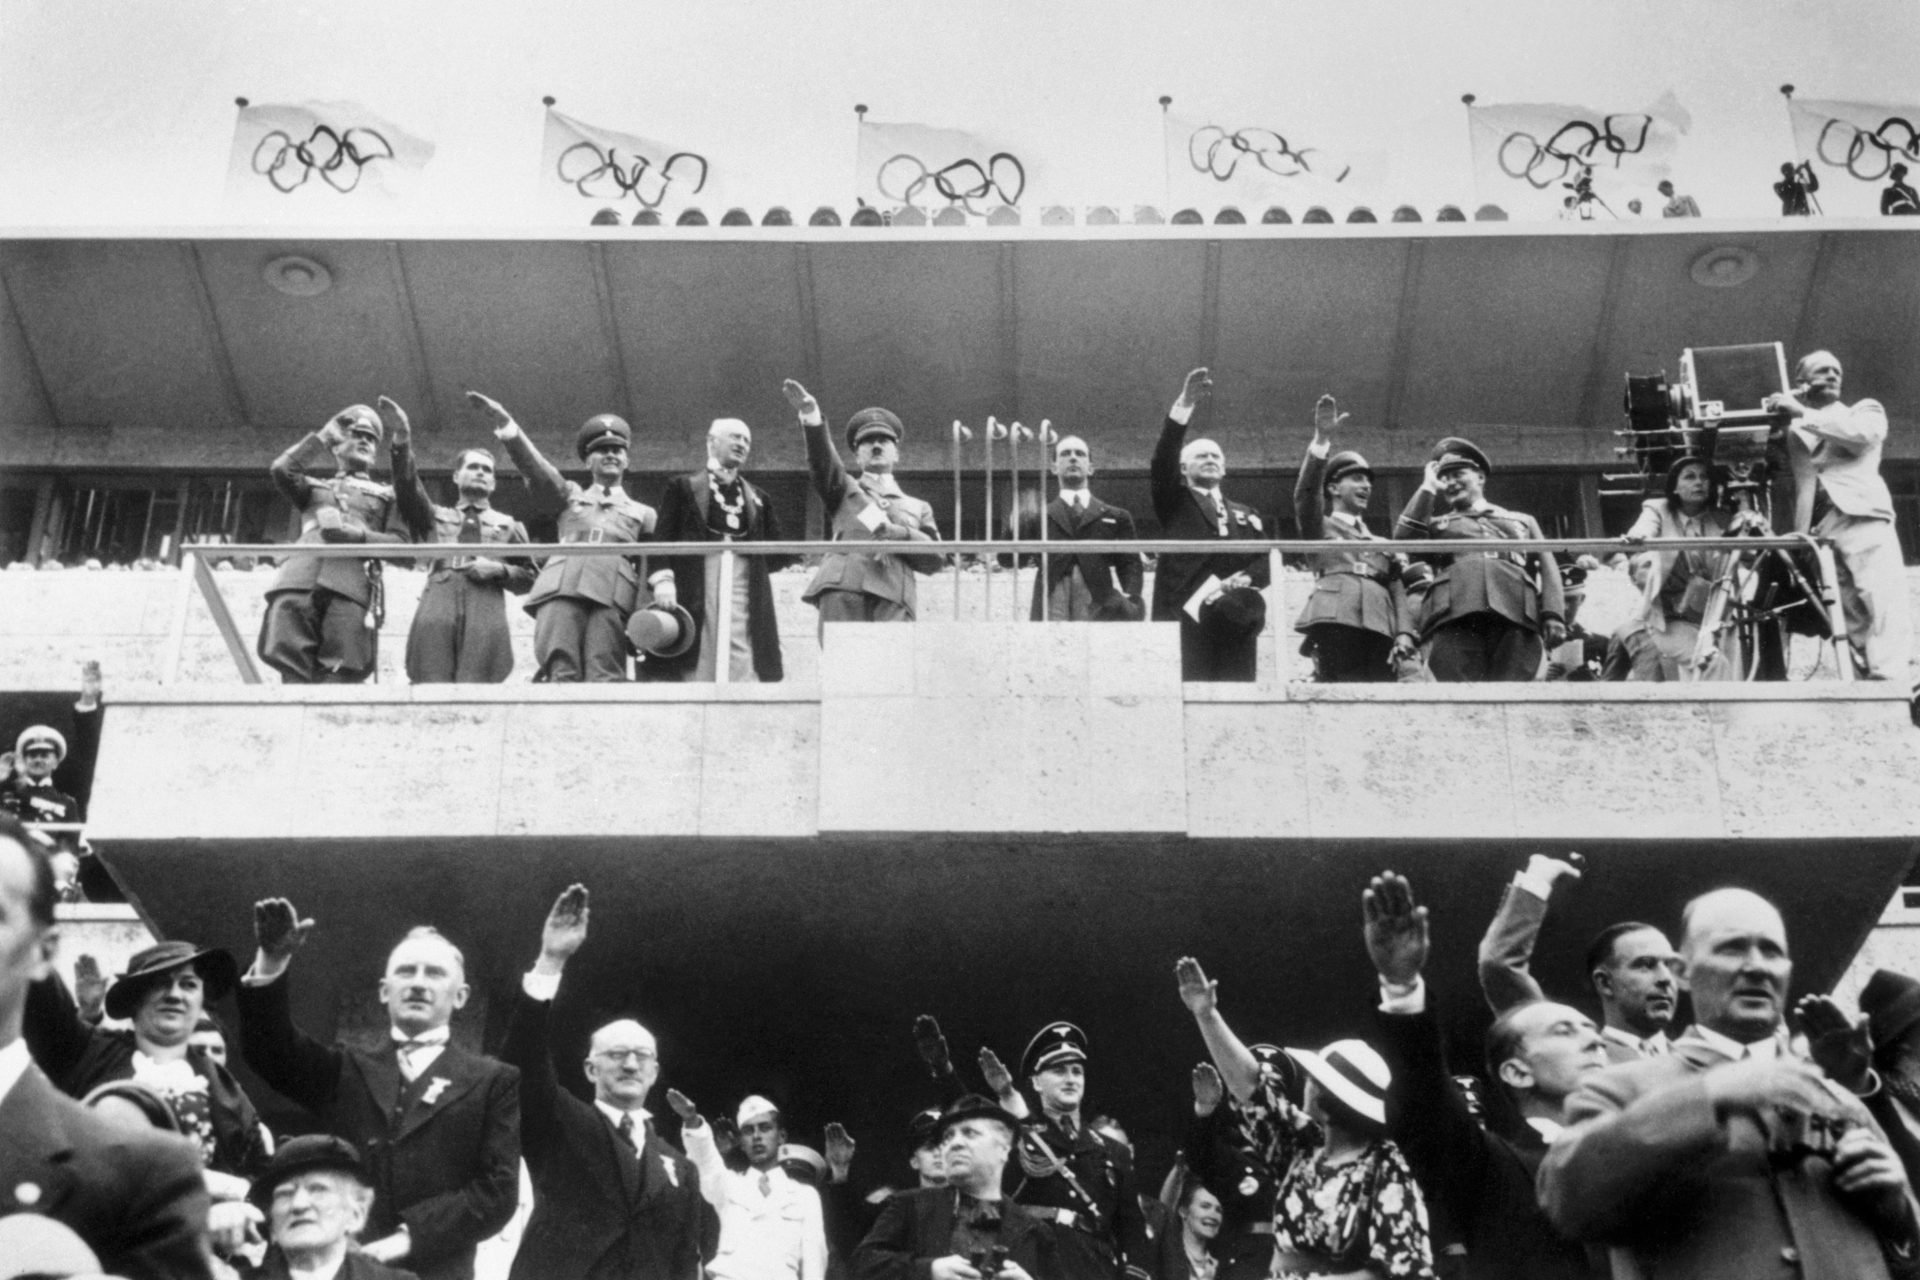 How one decision linked the Nazis and the Olympics forever